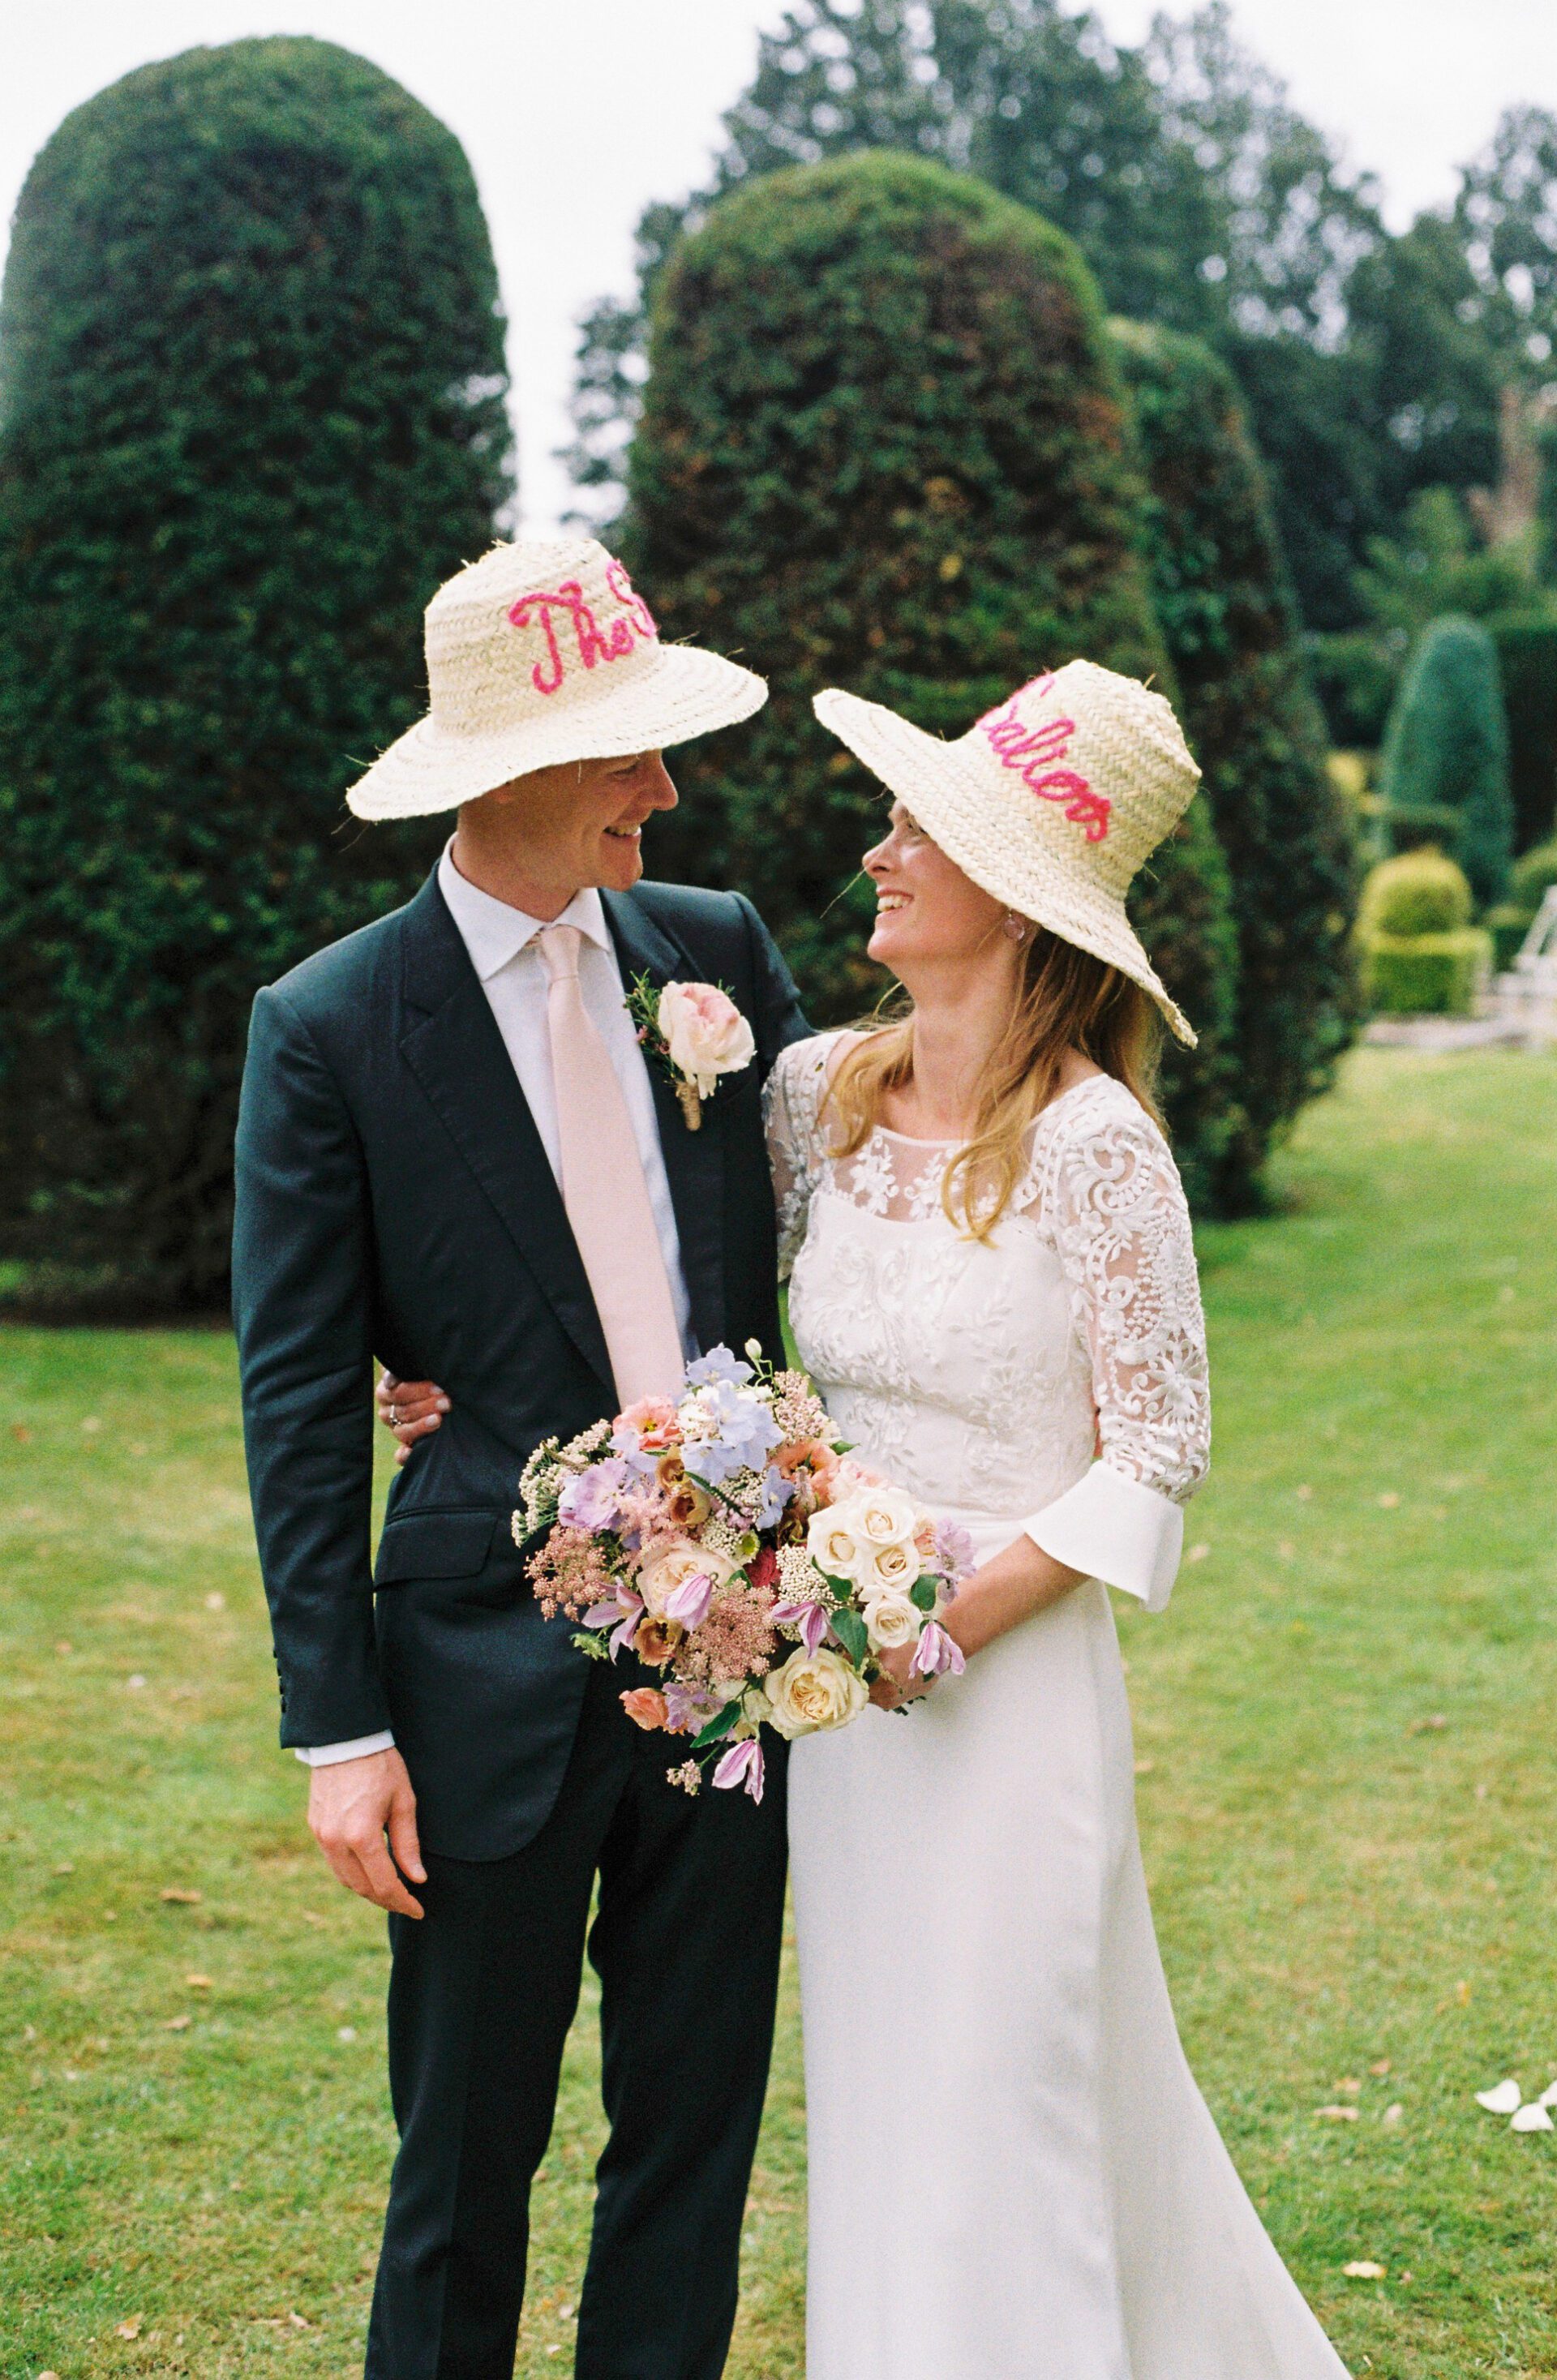 The bride and groom add a fun touch to their wedding with personalised hats